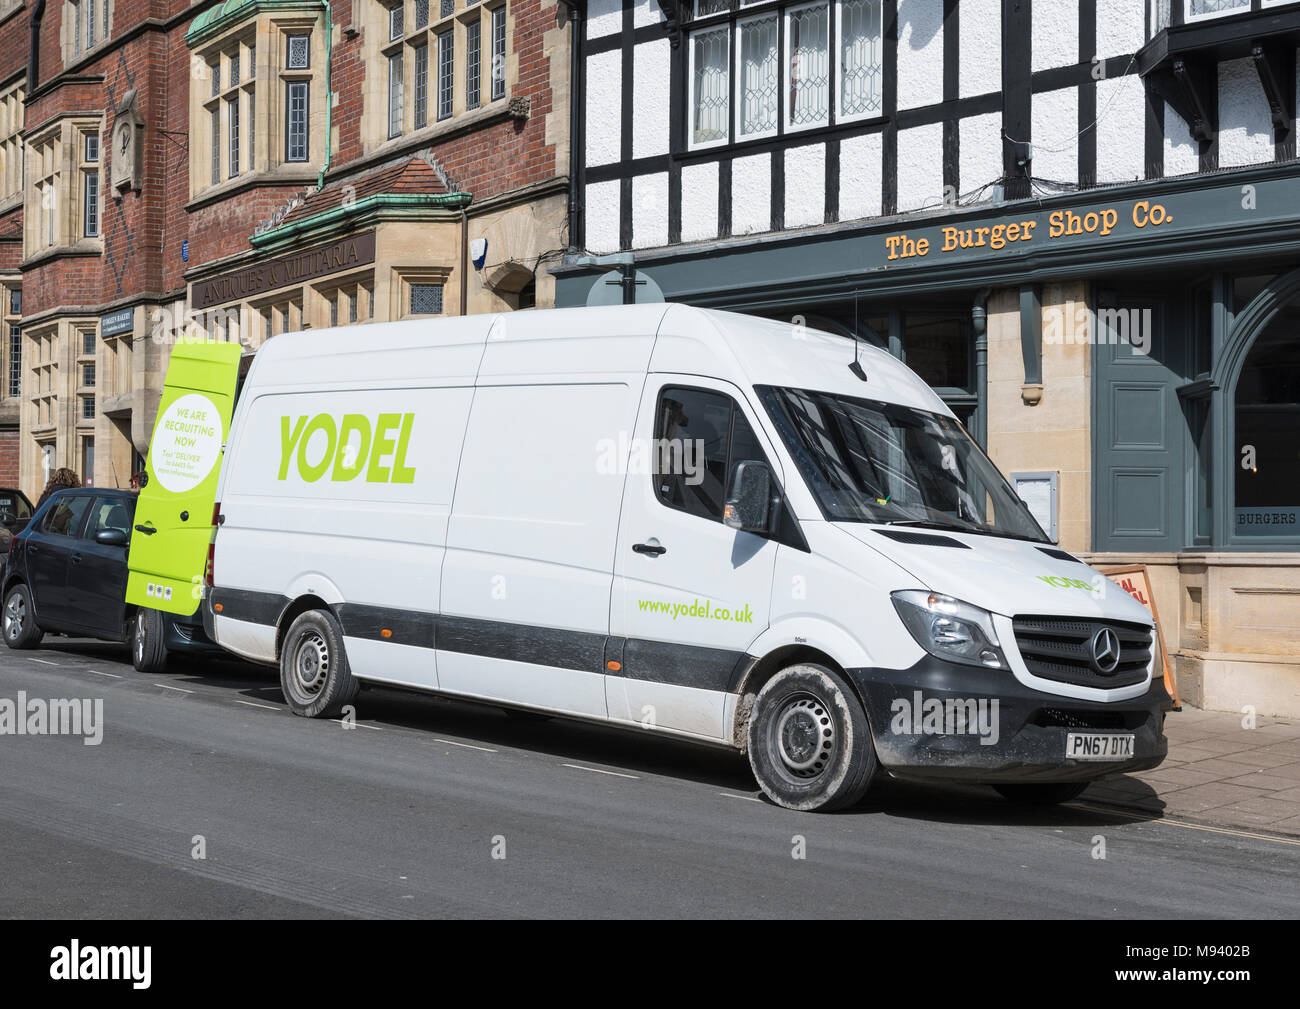 Yodel delivery van parked up making a delivery in a small town in England, UK. Stock Photo